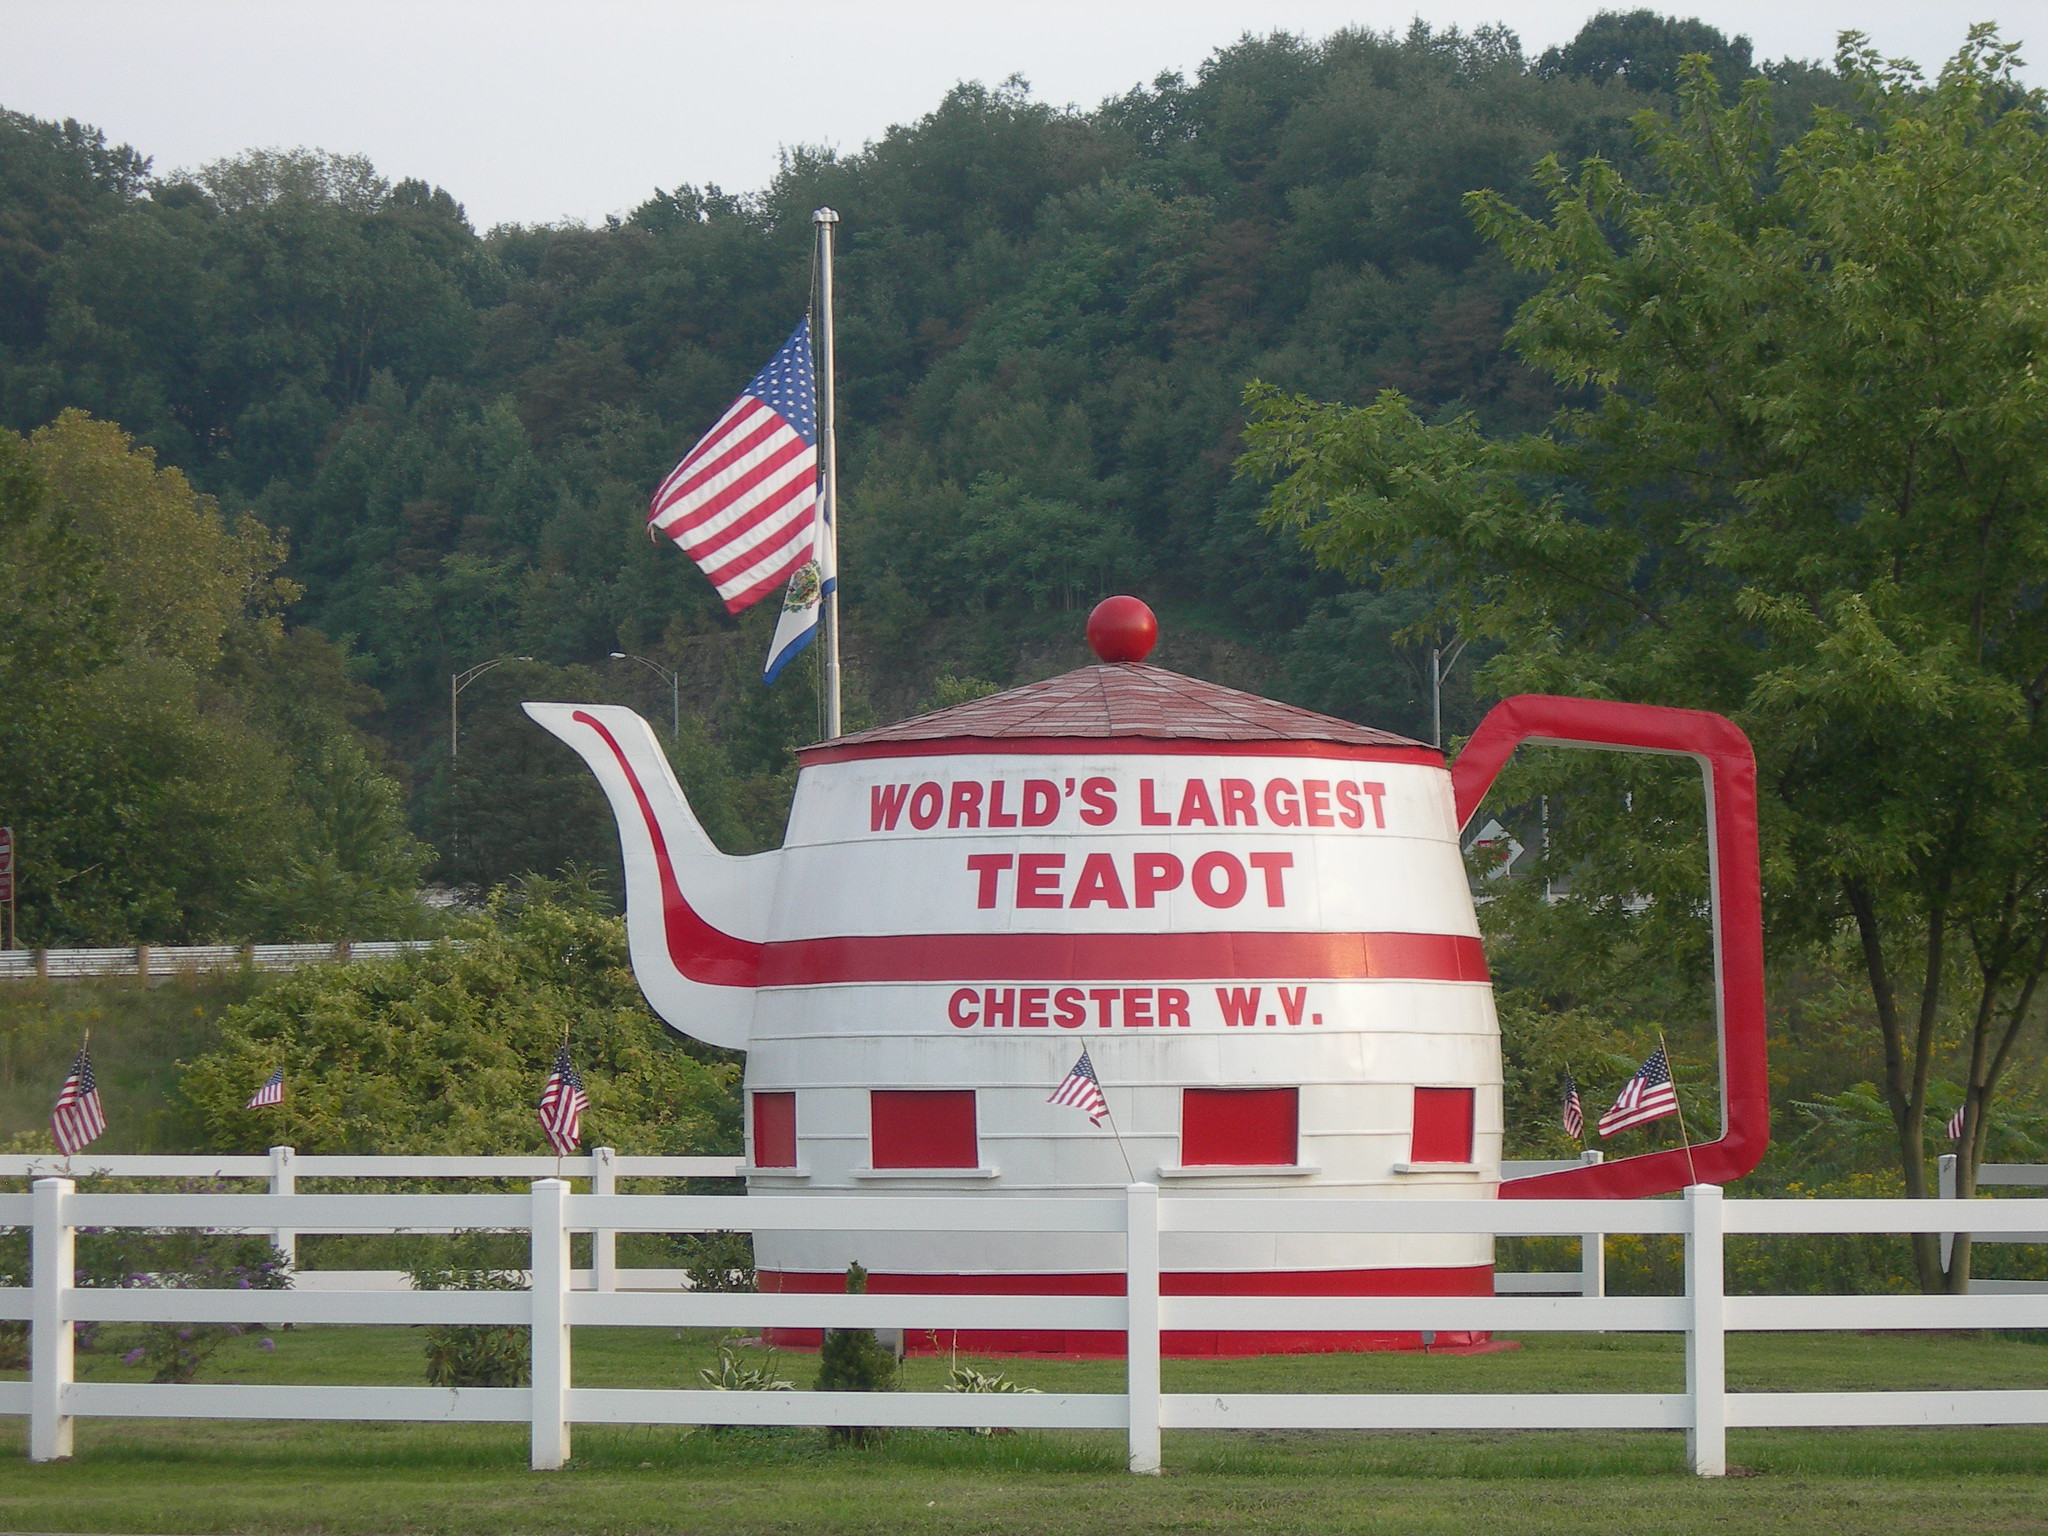 The Chester Teapot named as World’s Largest Teapot is one of the best attractions in West Virginia, fenced inside a green landscape and decorated with the U.S. flag